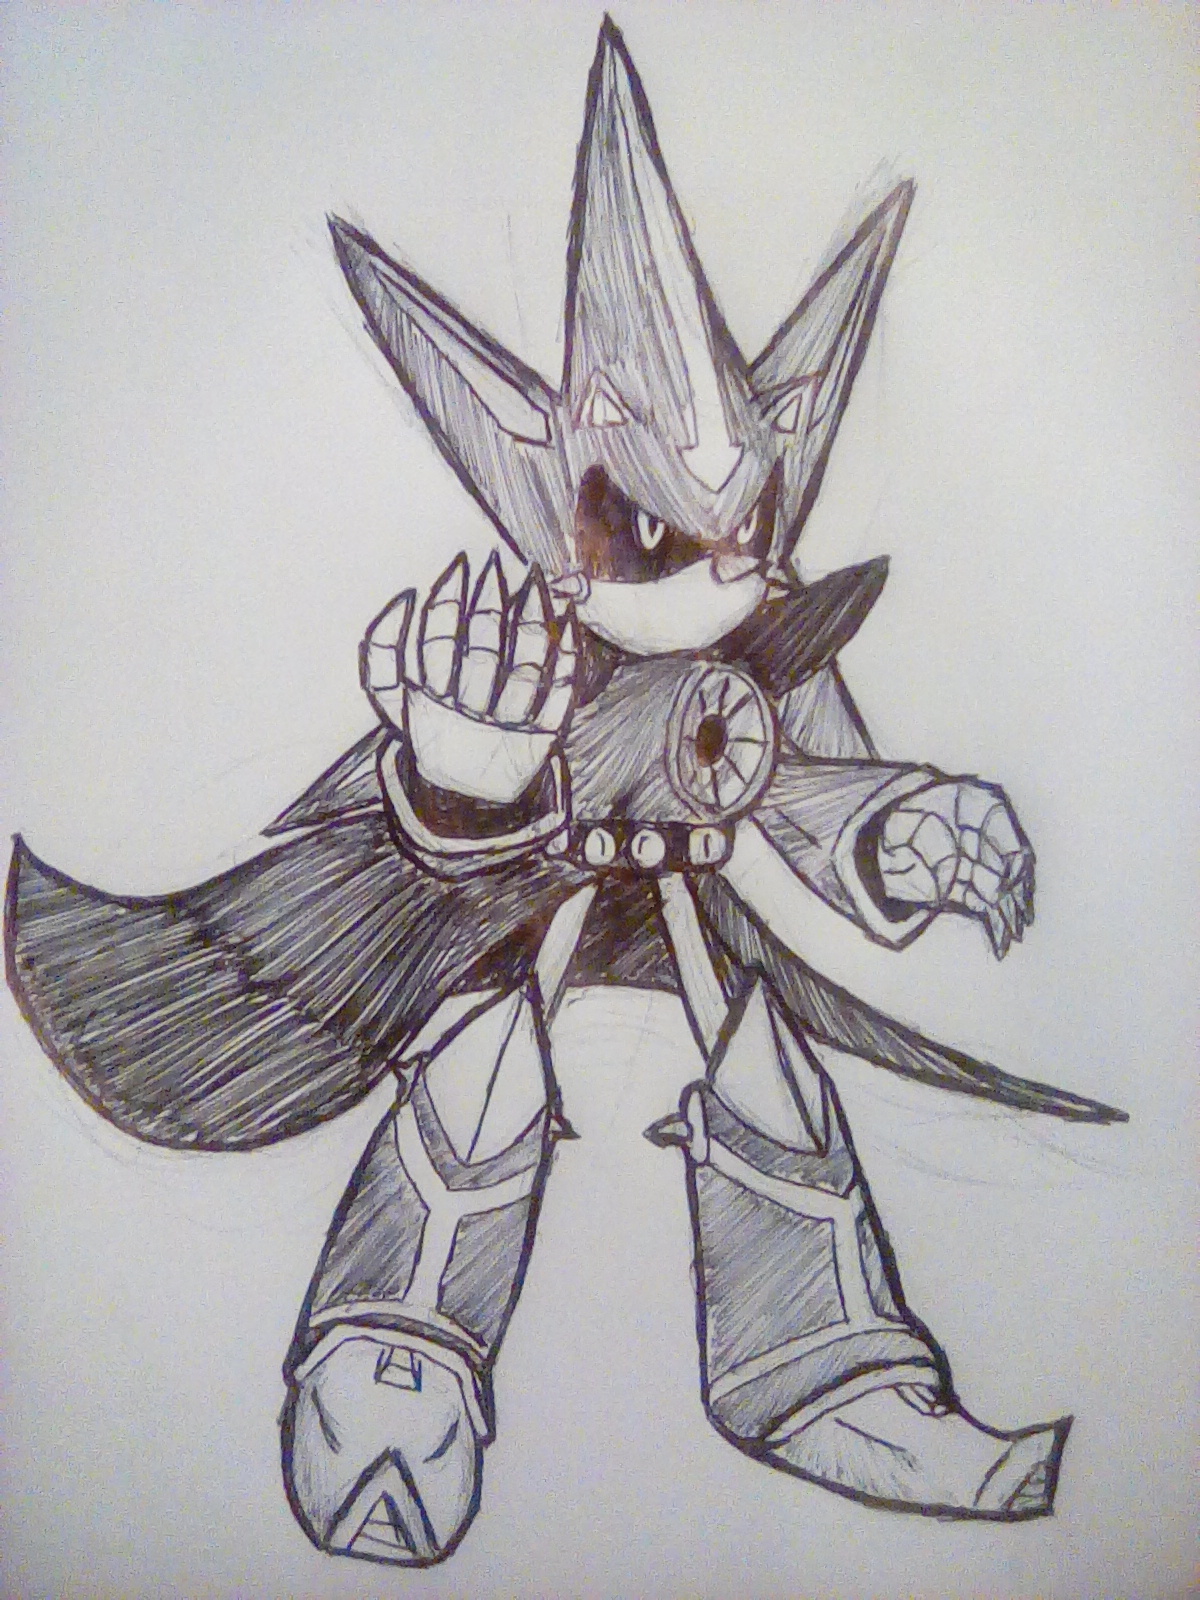 Neo Metal Sonic by sys1952407006 on DeviantArt